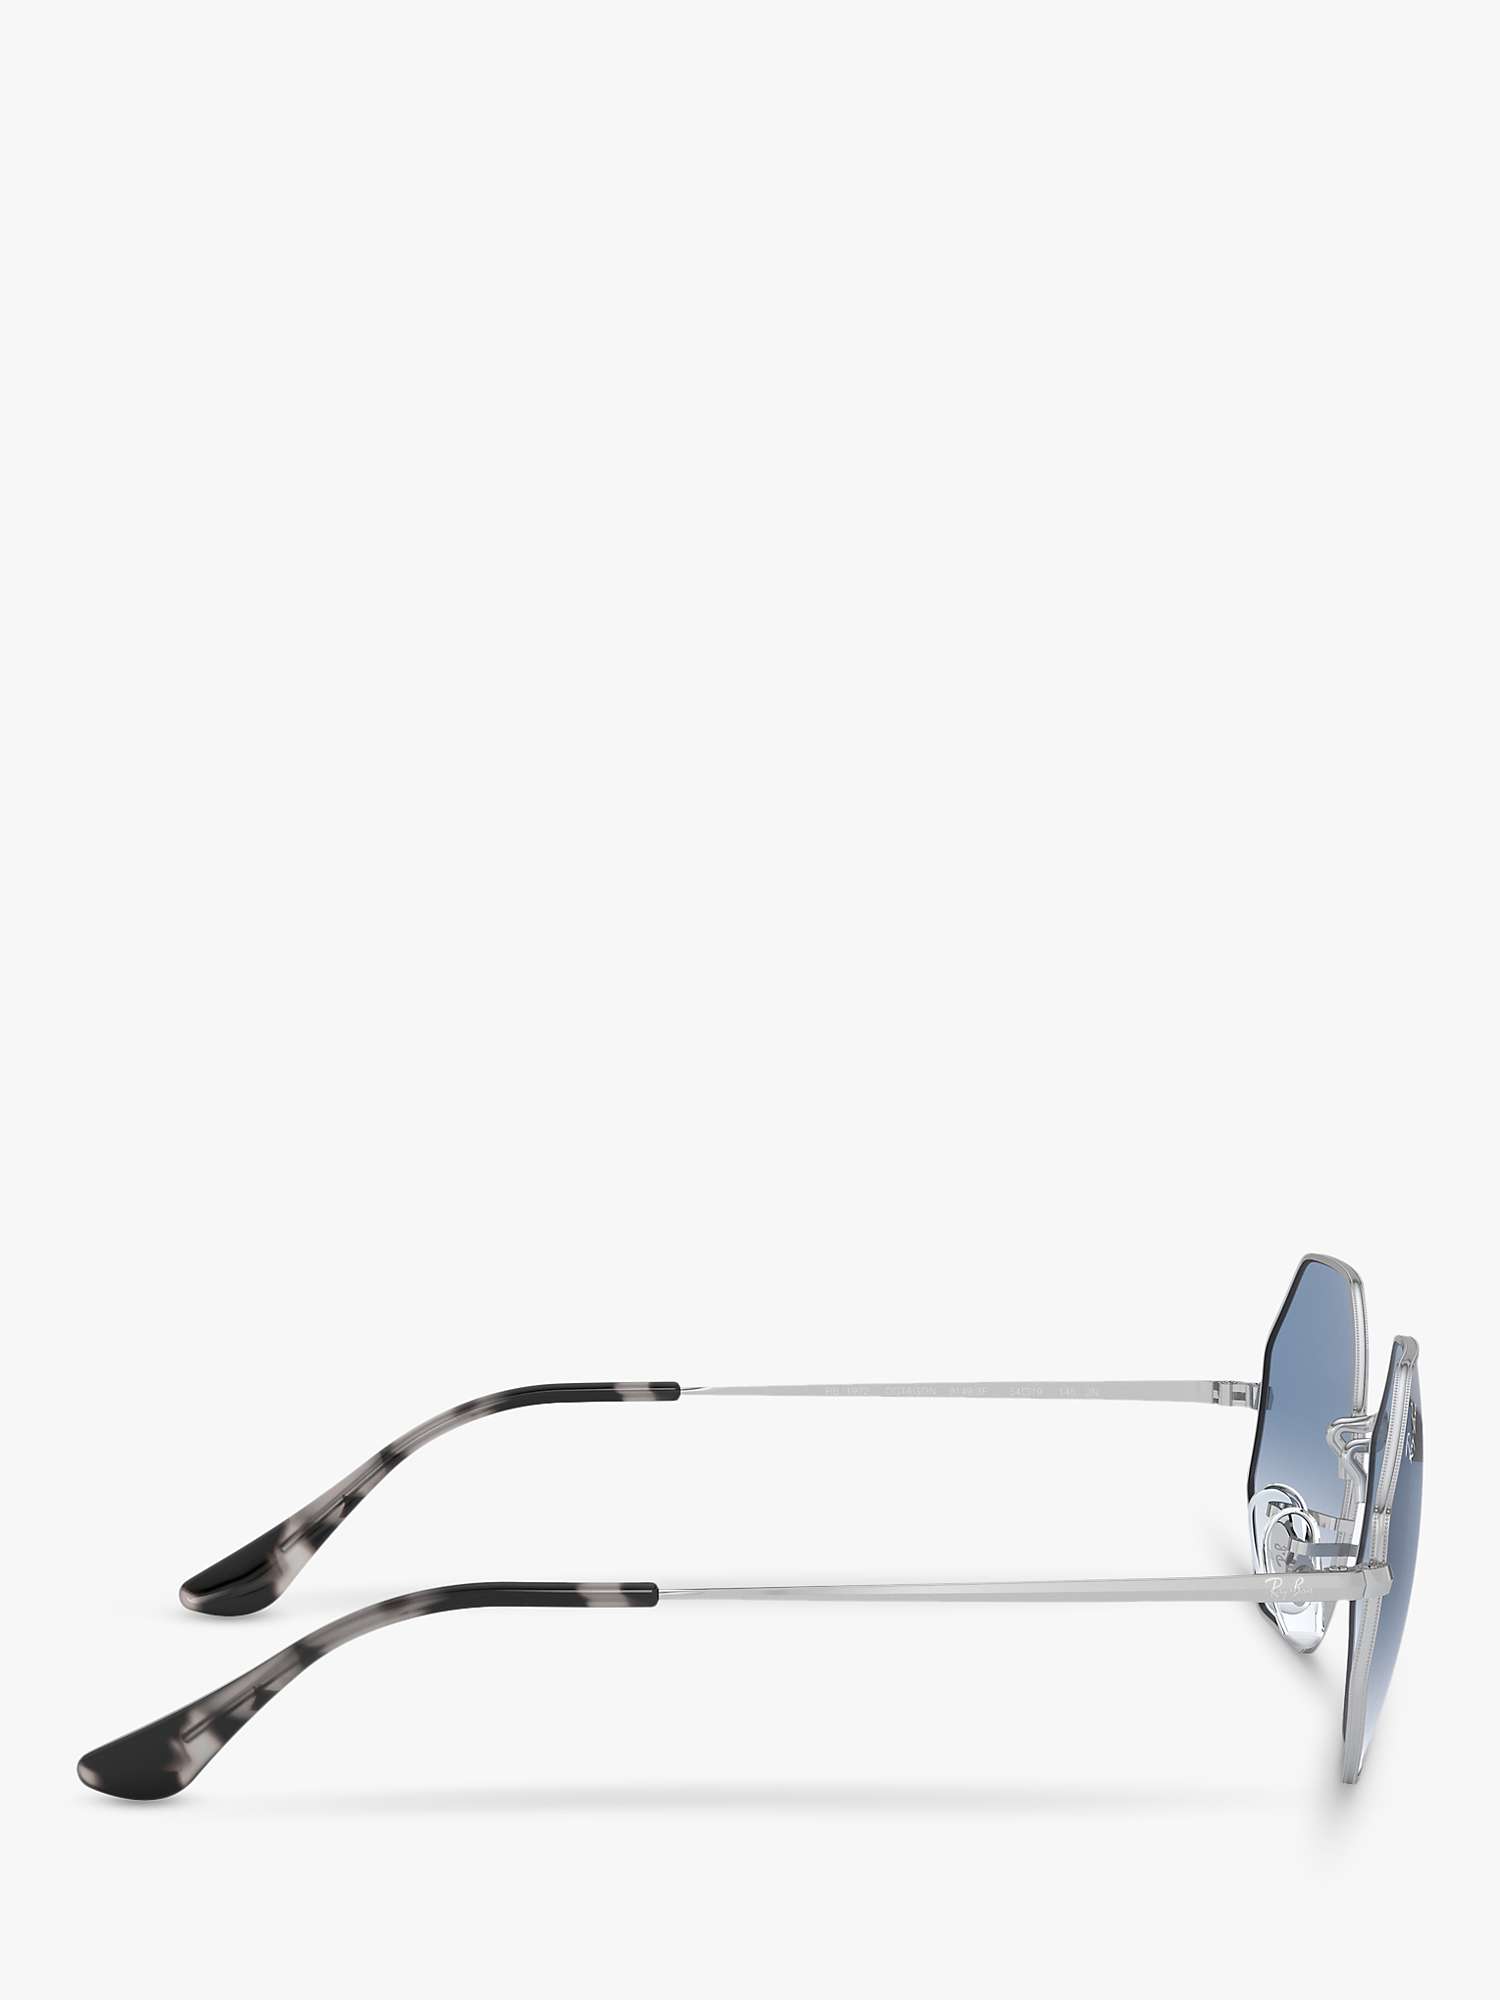 Buy Ray-Ban RB1972 Unisex Octagonal Sunglasses, Silver/Blue Gradient Online at johnlewis.com